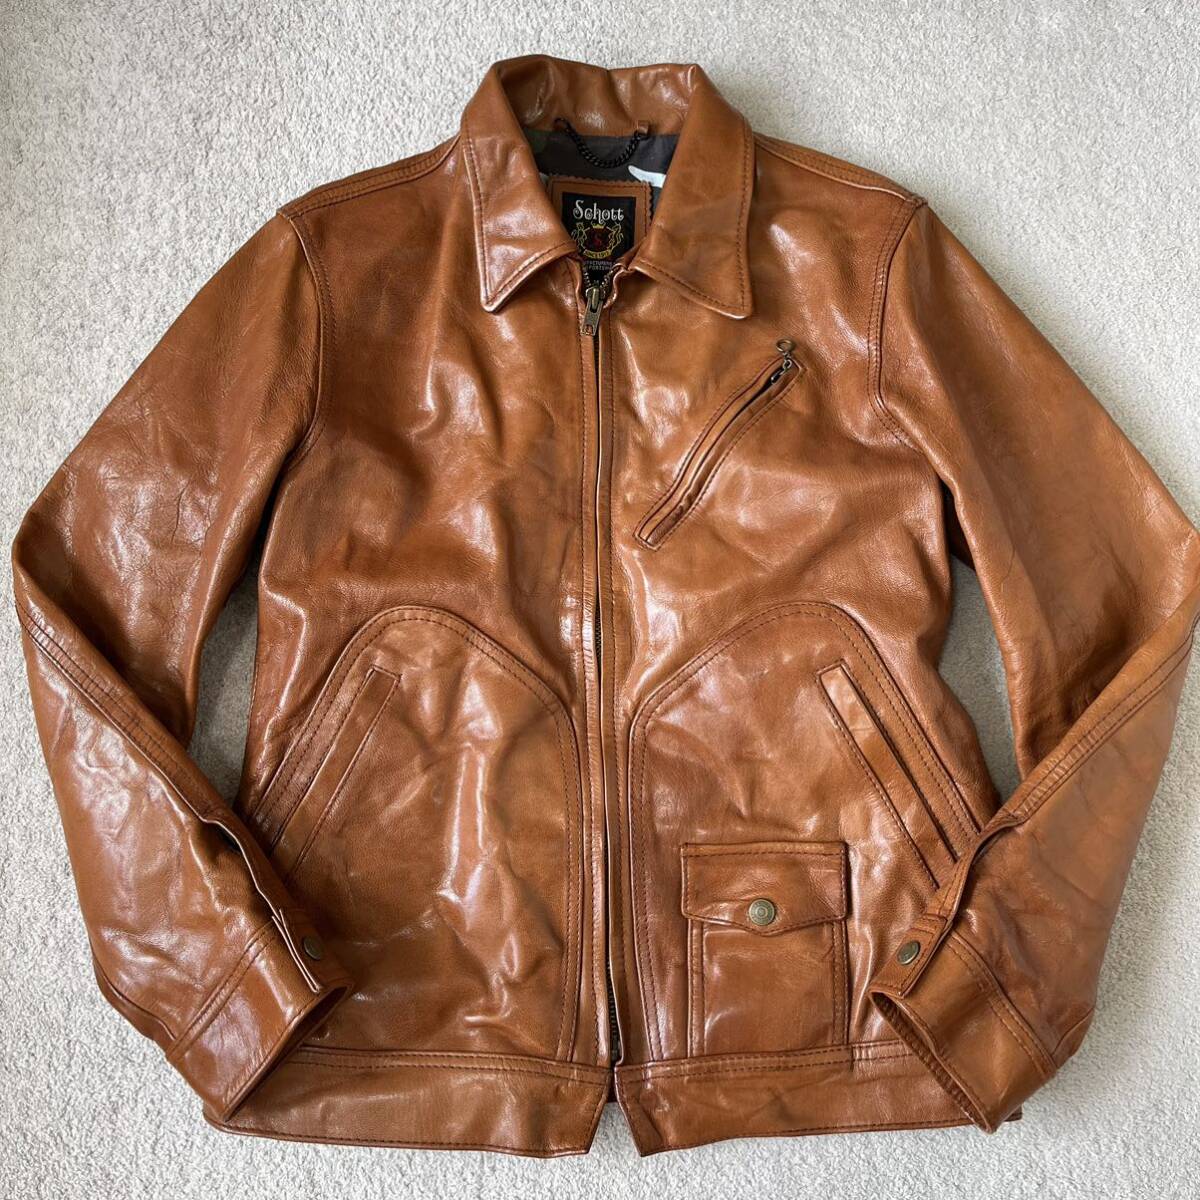  beautiful goods * Schott Schott leather jacket Rider's single camouflage camouflage single collar attaching original leather Brown outer leather jacket 3161042